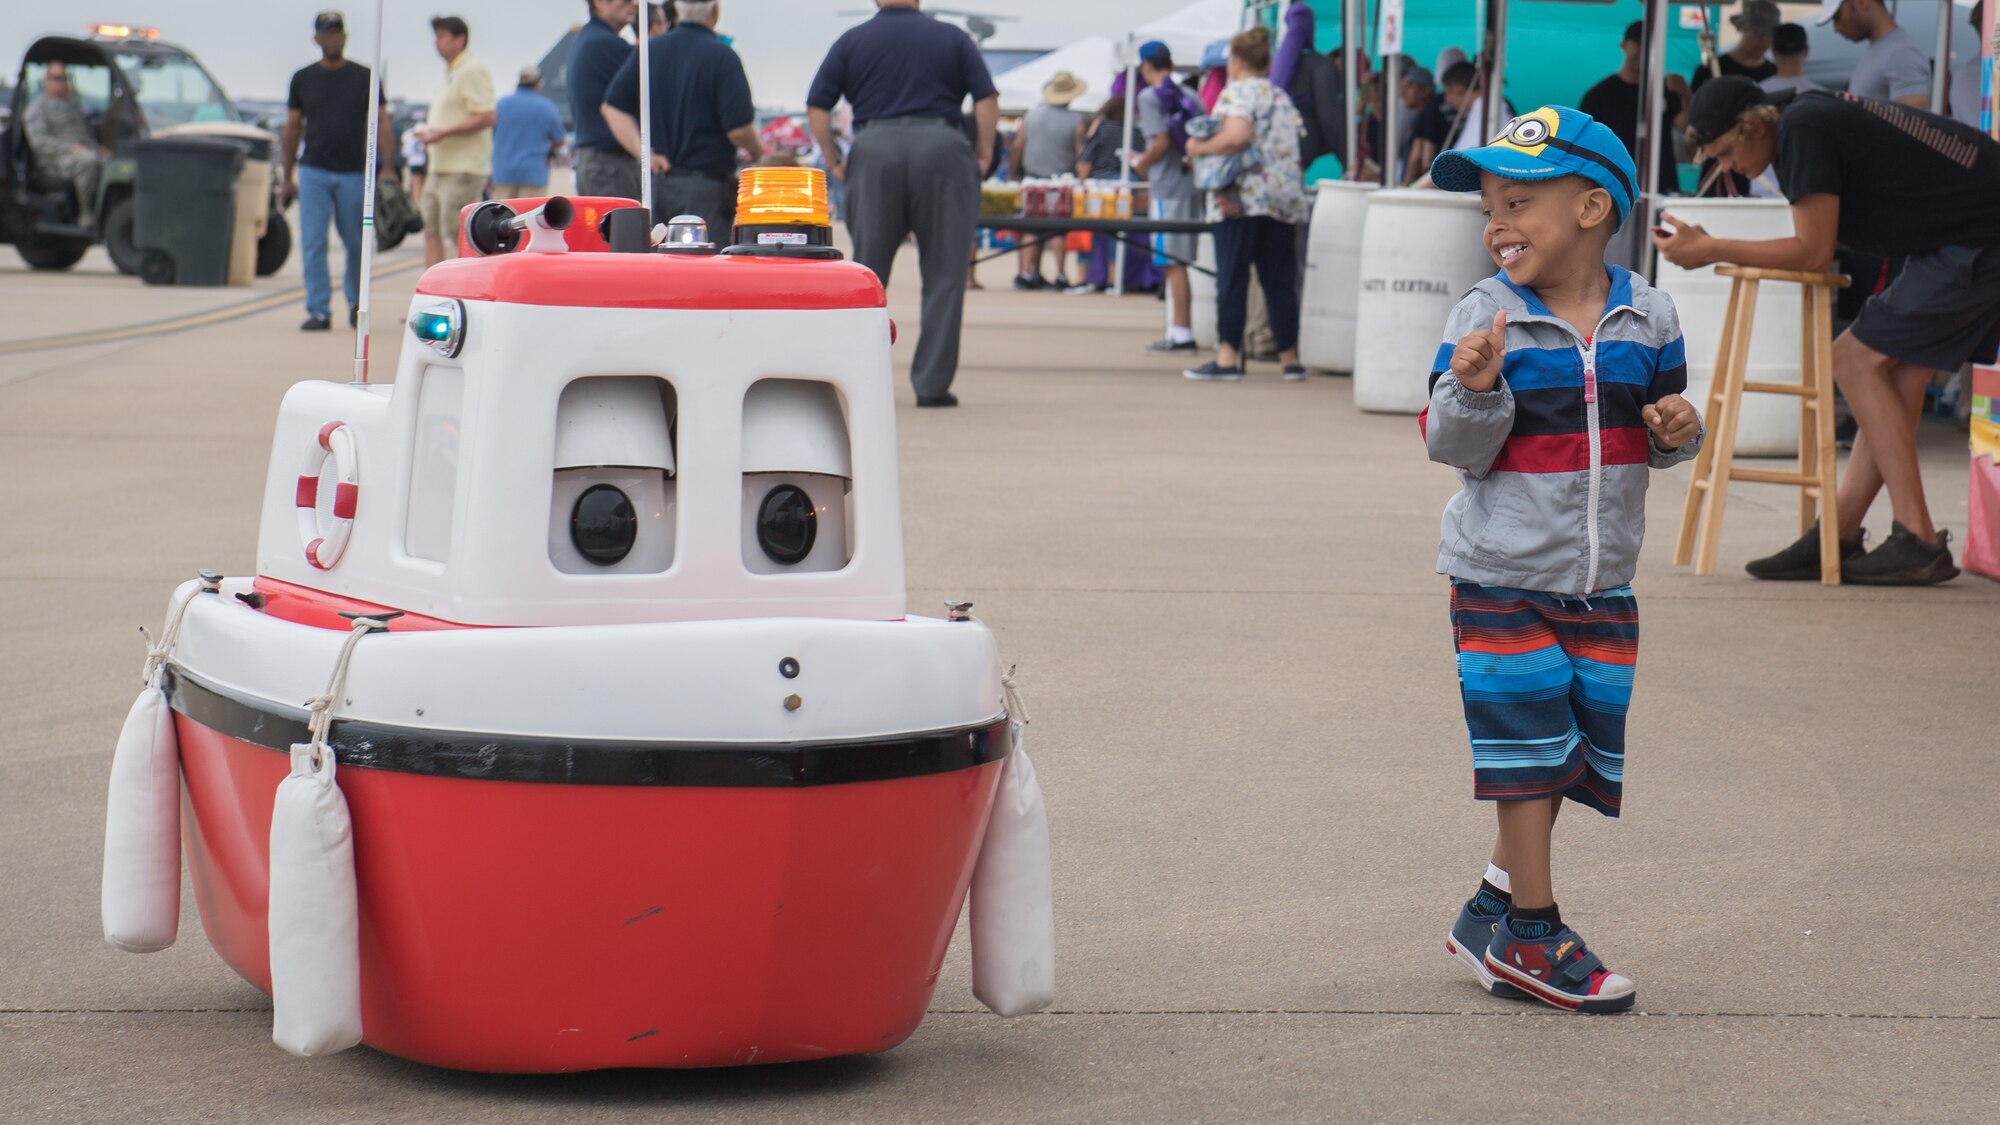 A child laughs at the U.S. Army Corps of Engineers water safety mascot, Cory the Tugboat, during the Defenders of Liberty Air and Space Show at Barksdale Air Force Base, La., May 18, 2019. Visitors had the opportunity to experience flyovers, performances and static displays from numerous bases. (U.S. Air Force photo by Tech. Sgt. Daniel Martinez)